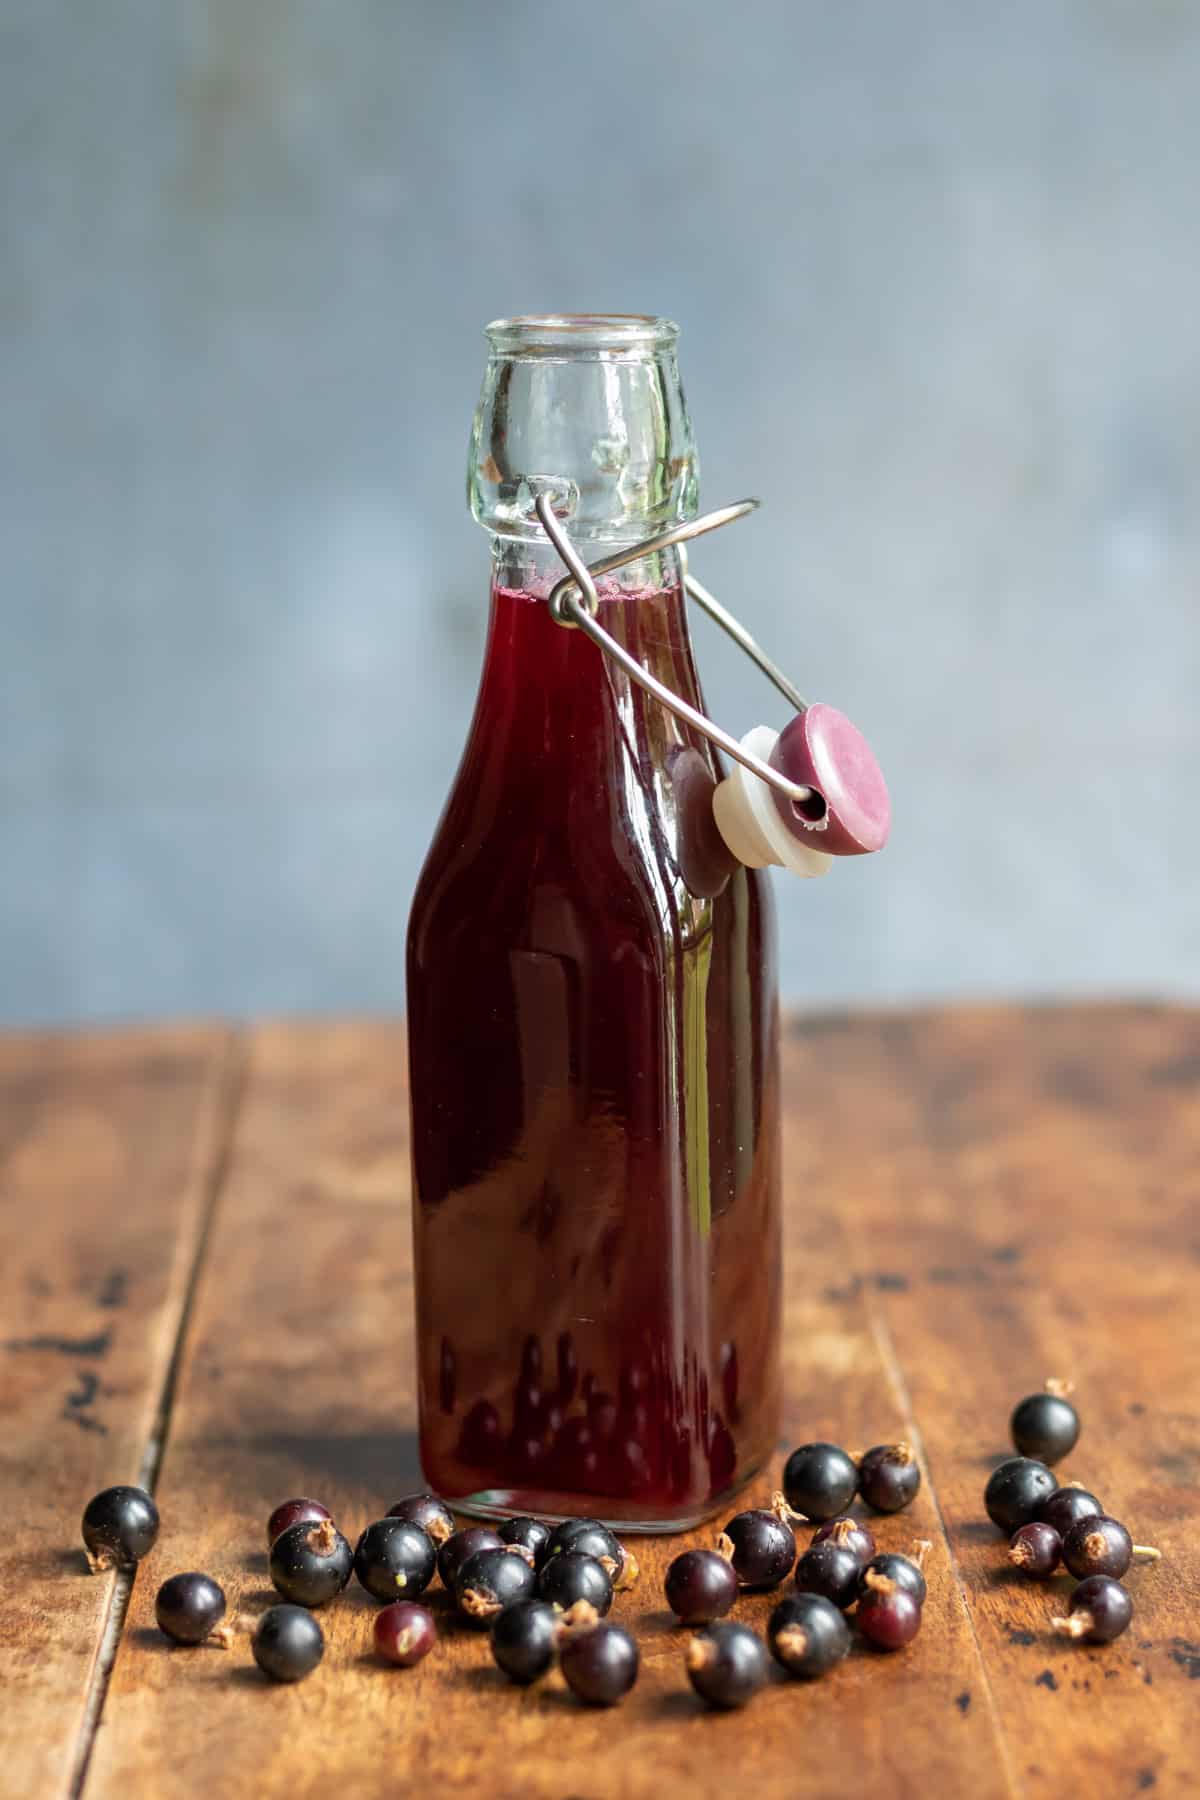 Wooden table with a bottle of blackcurrant simple syrup, with blackcurrants scattered next to it.